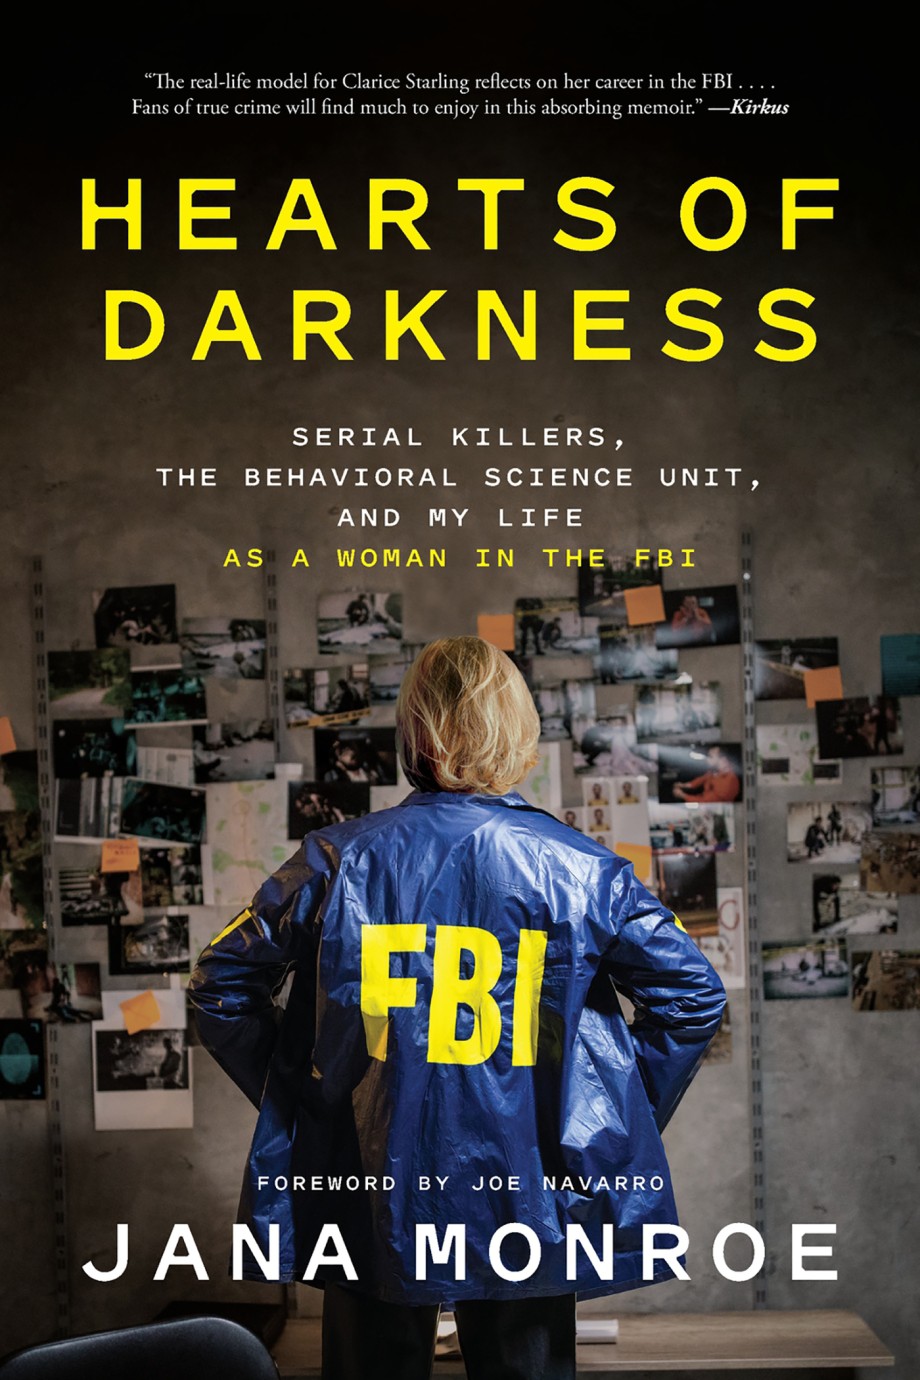 Hearts of Darkness Serial Killers, the Behavioral Science Unit, and My Life as a Woman in the FBI